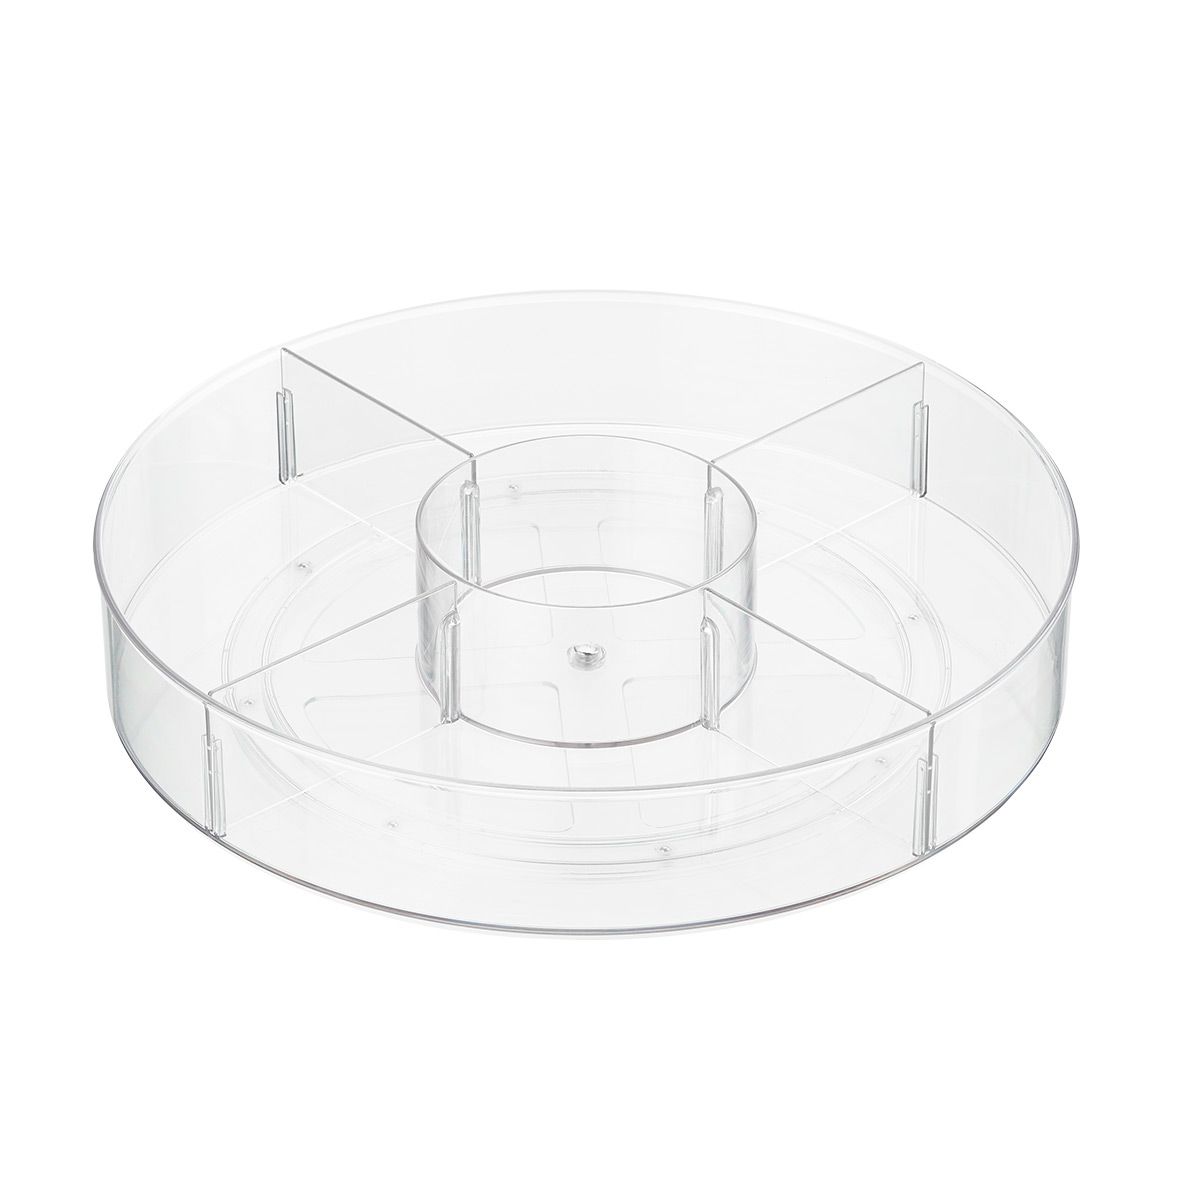 THE HOME EDIT Large Turntable ClearSKU:100792243.752 Reviews | The Container Store